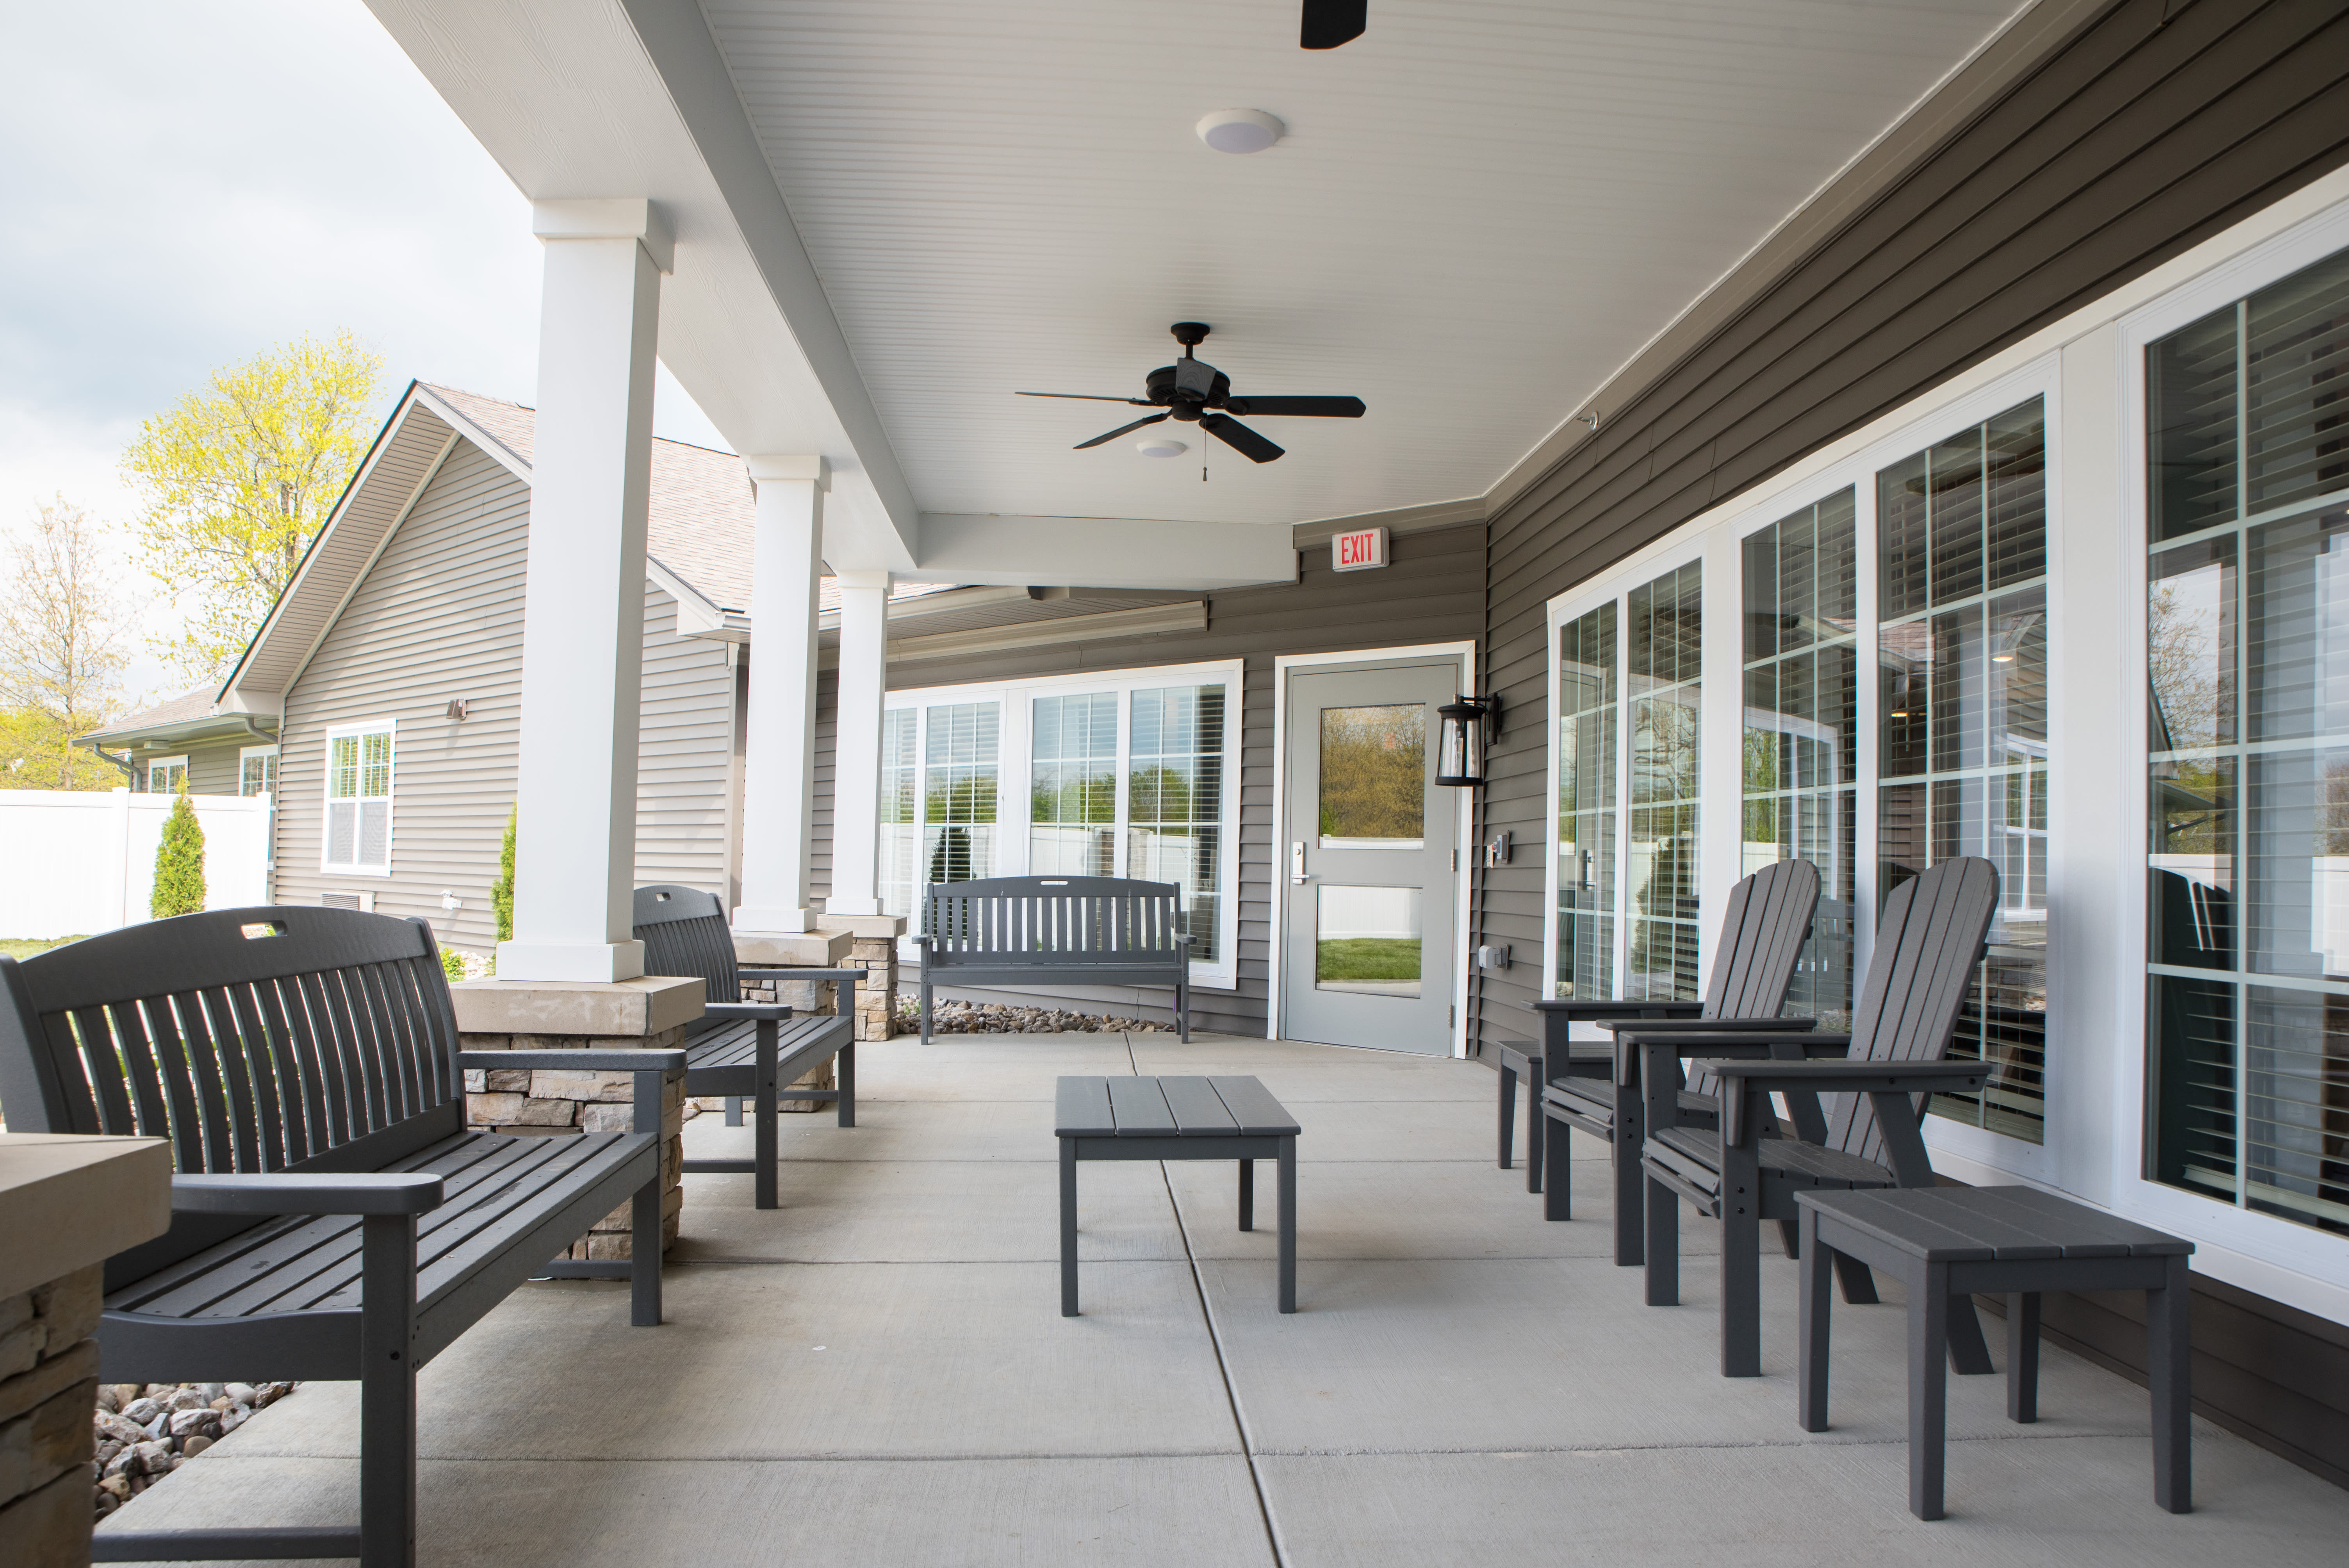 Outdoor lounge area at Cooper Trail Senior Living in Bardstown, Kentucky